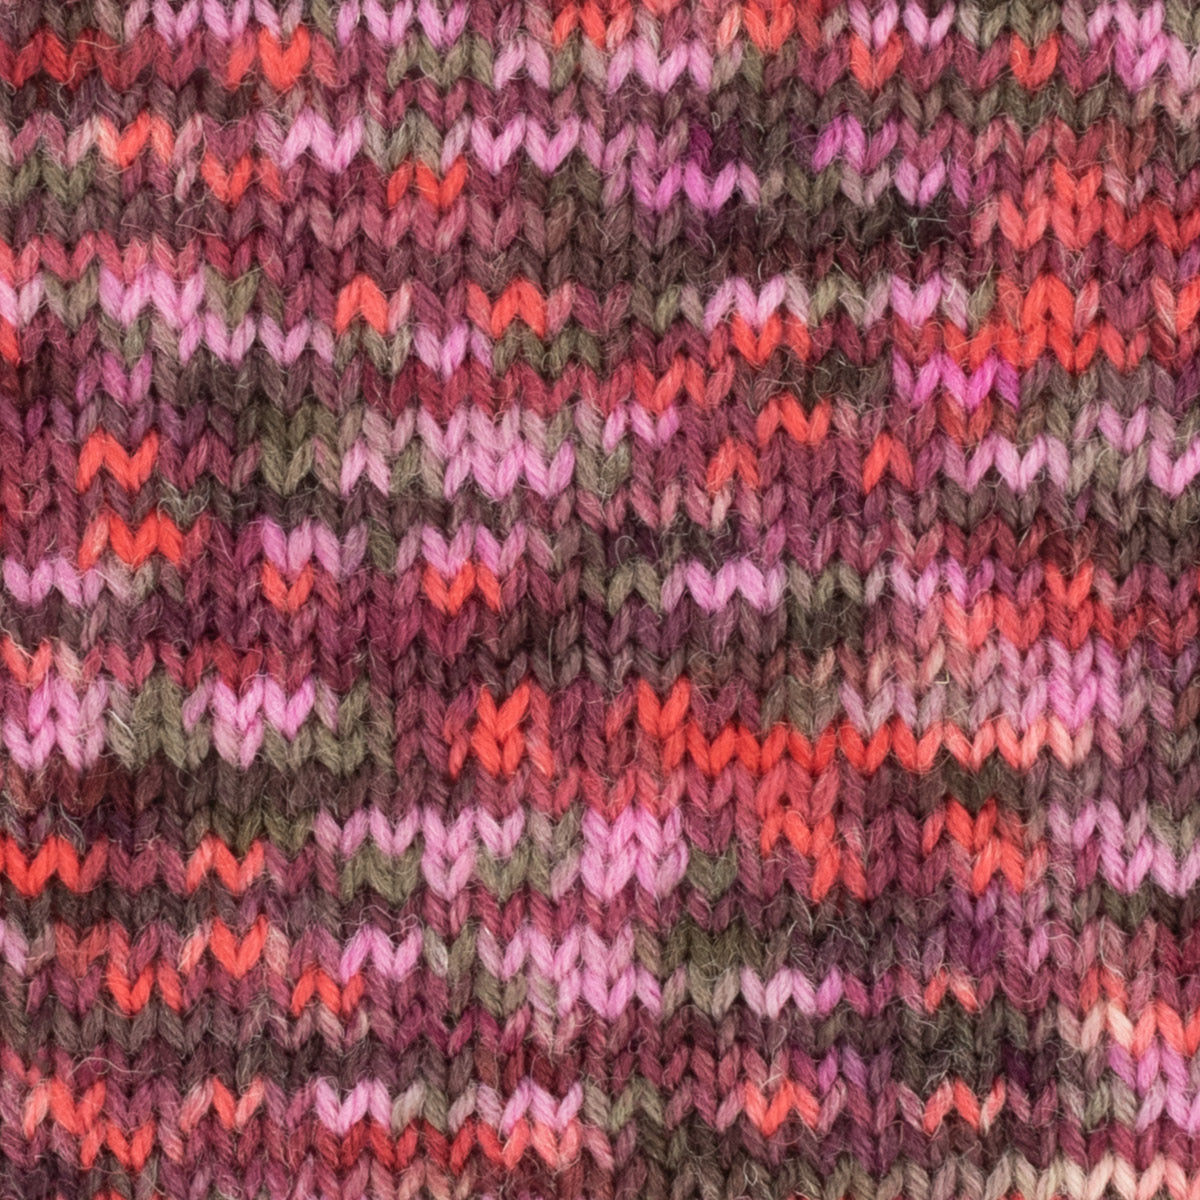 West Yorkshire Spinners Colour Lab DK - Zandra Rhodes